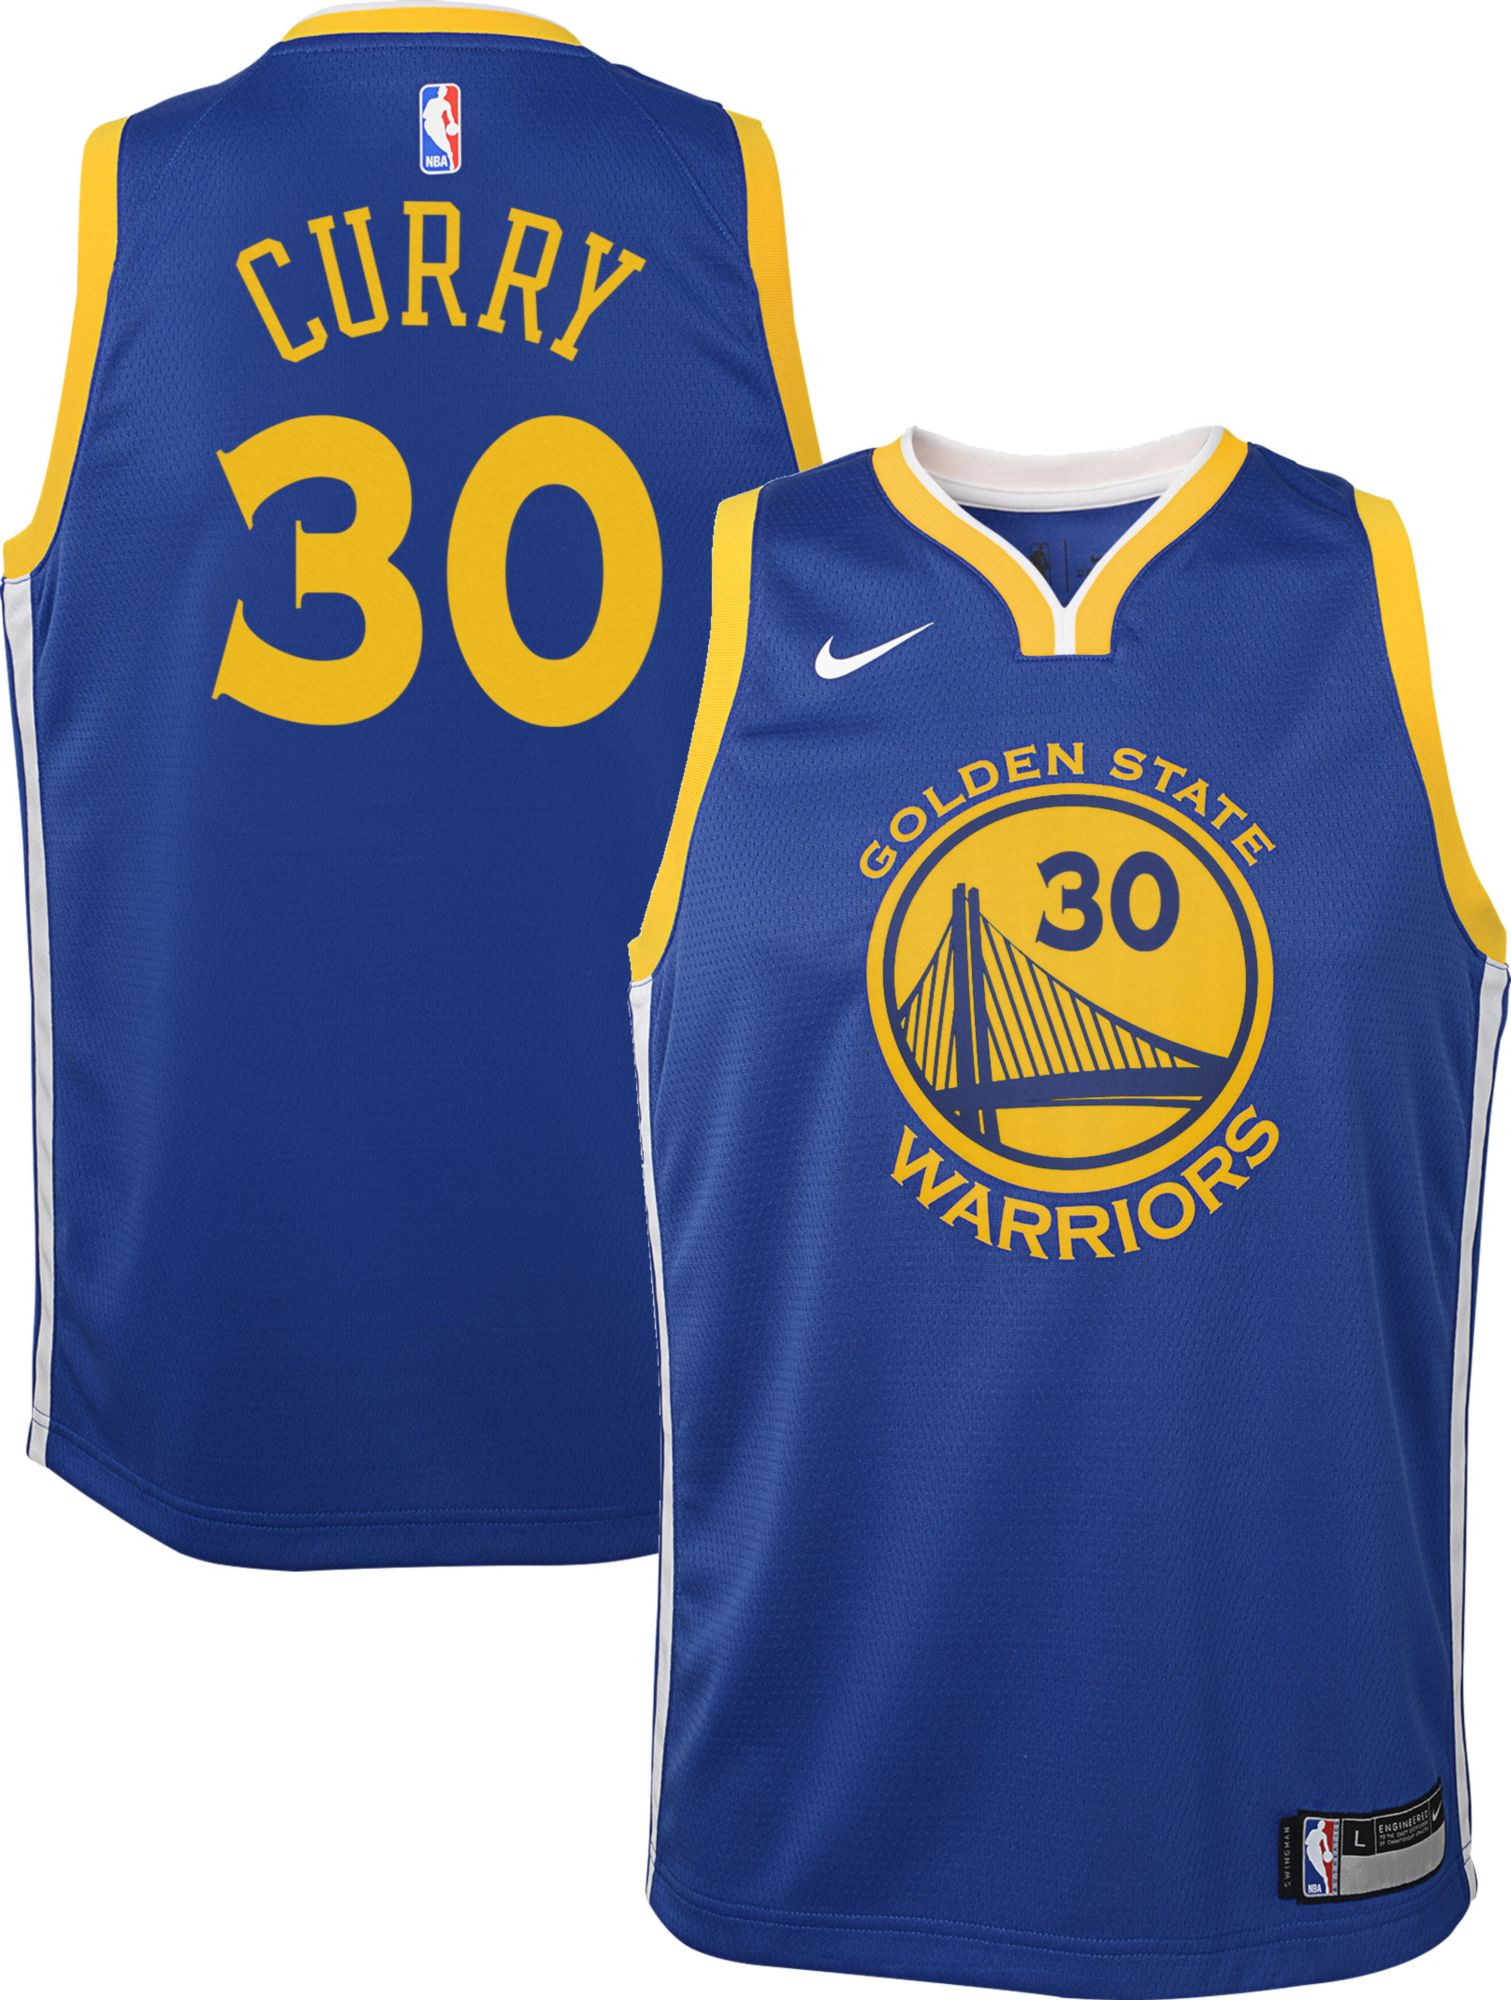 Stephen Curry Jerseys | DICK'S Sporting Goods